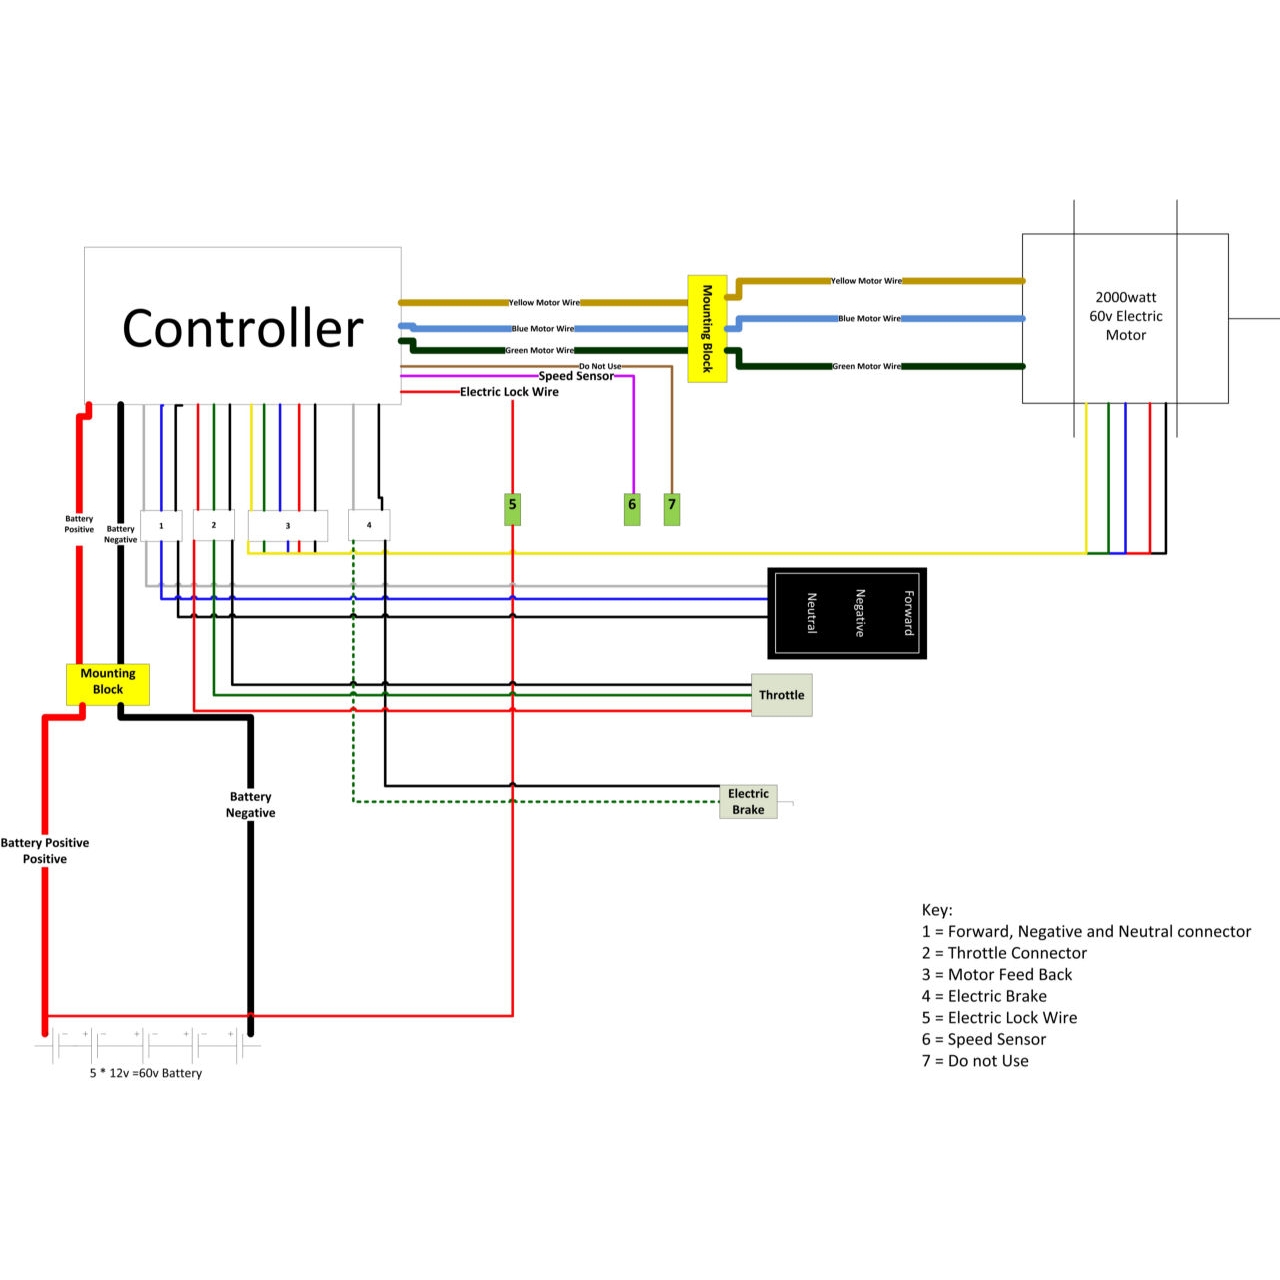 Combination Motor Starter Wiring Diagram from www.motiondynamics.com.au